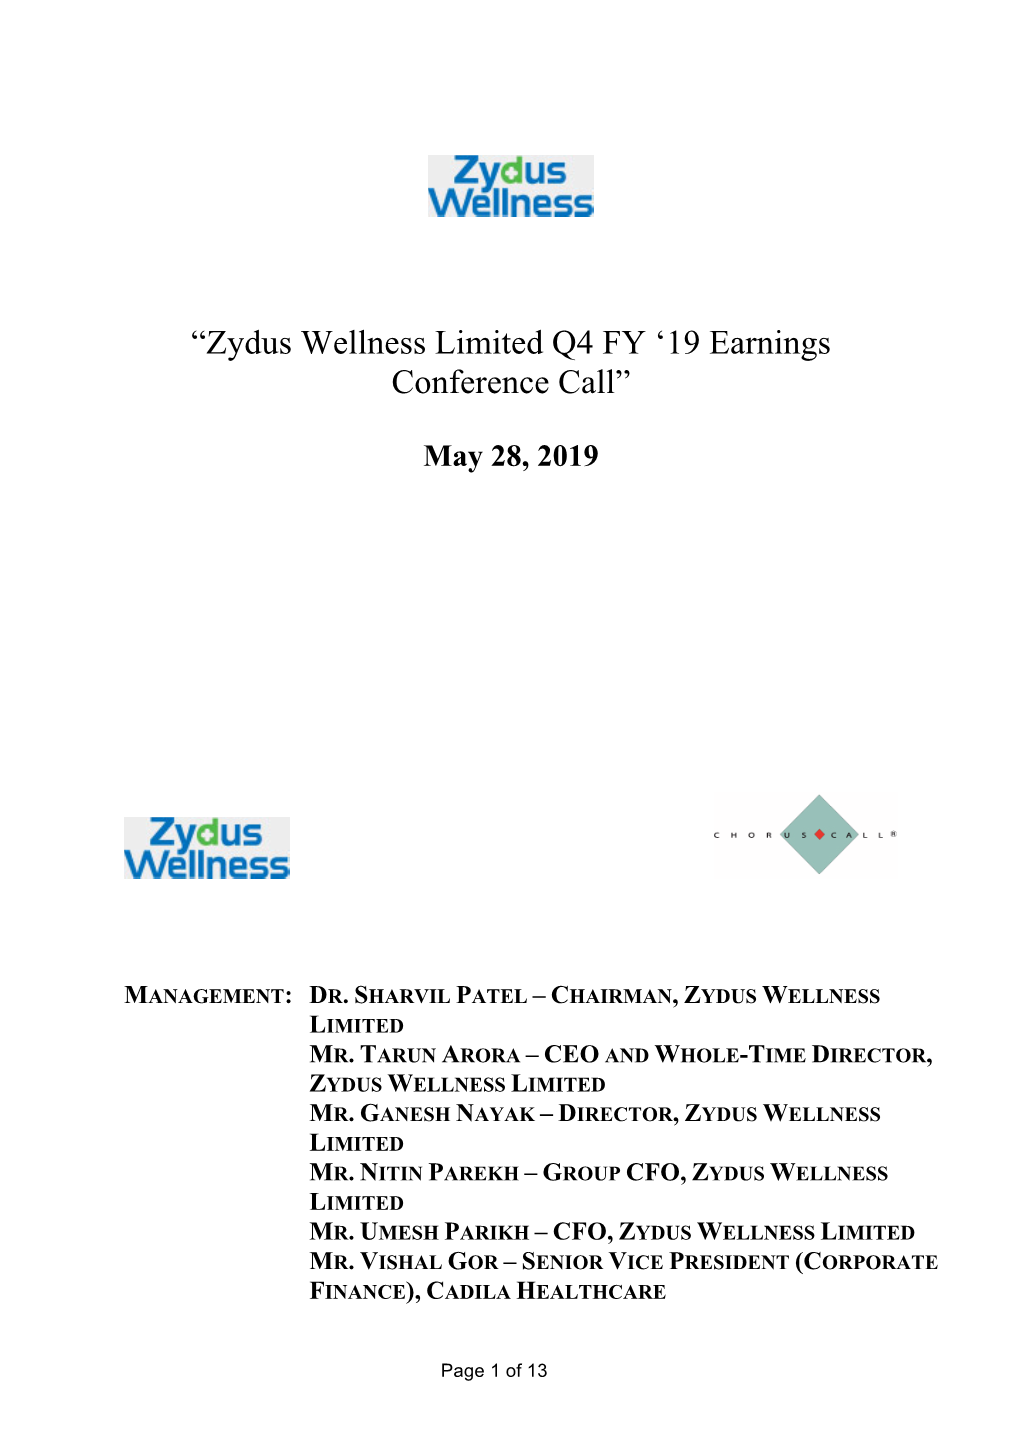 “Zydus Wellness Limited Q4 FY '19 Earnings Conference Call”